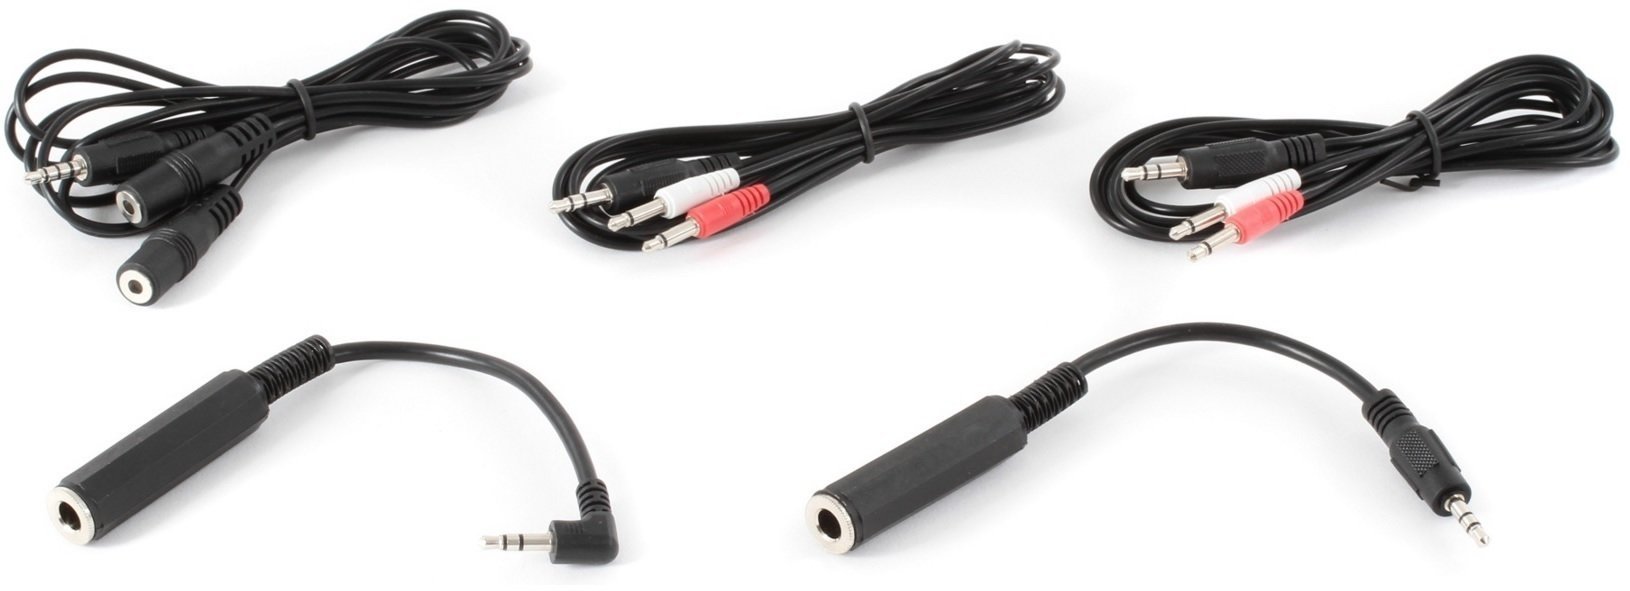 Audio kabel Keith McMillen CV Cable Kit